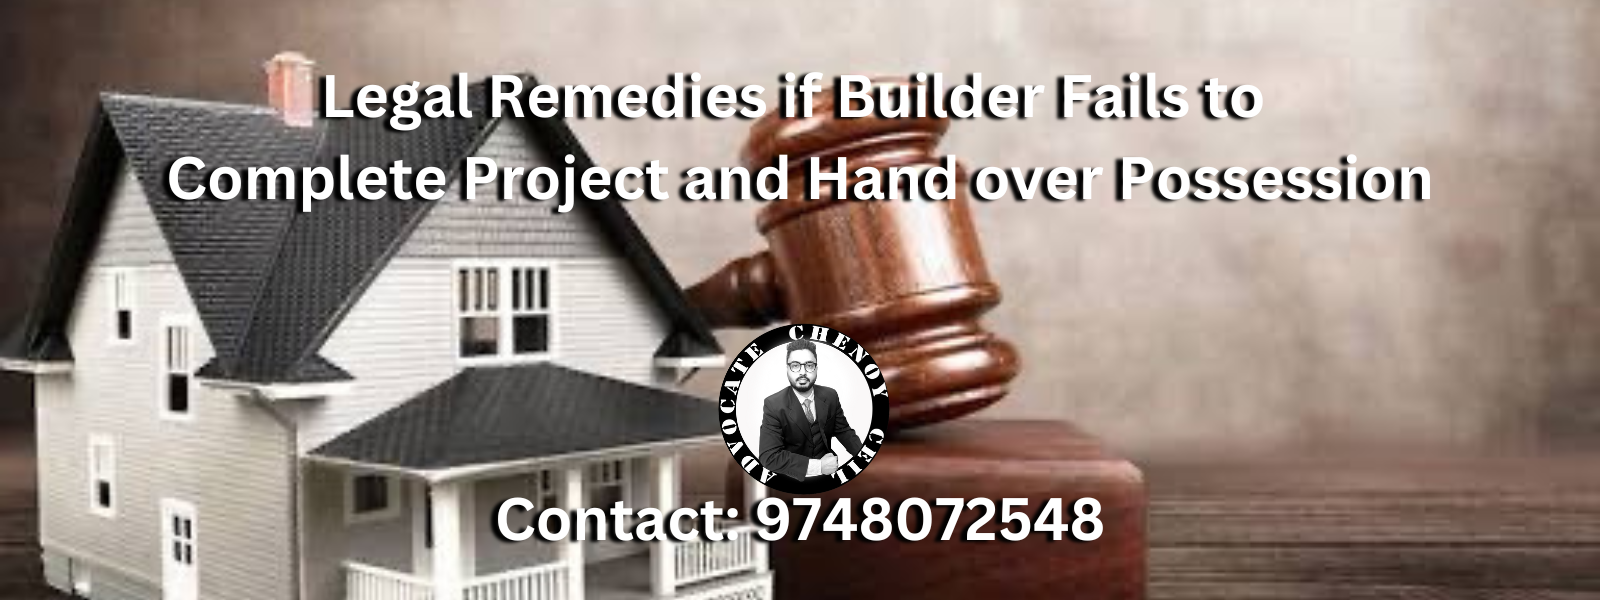 Legal Remedies if Builder Delay Possession